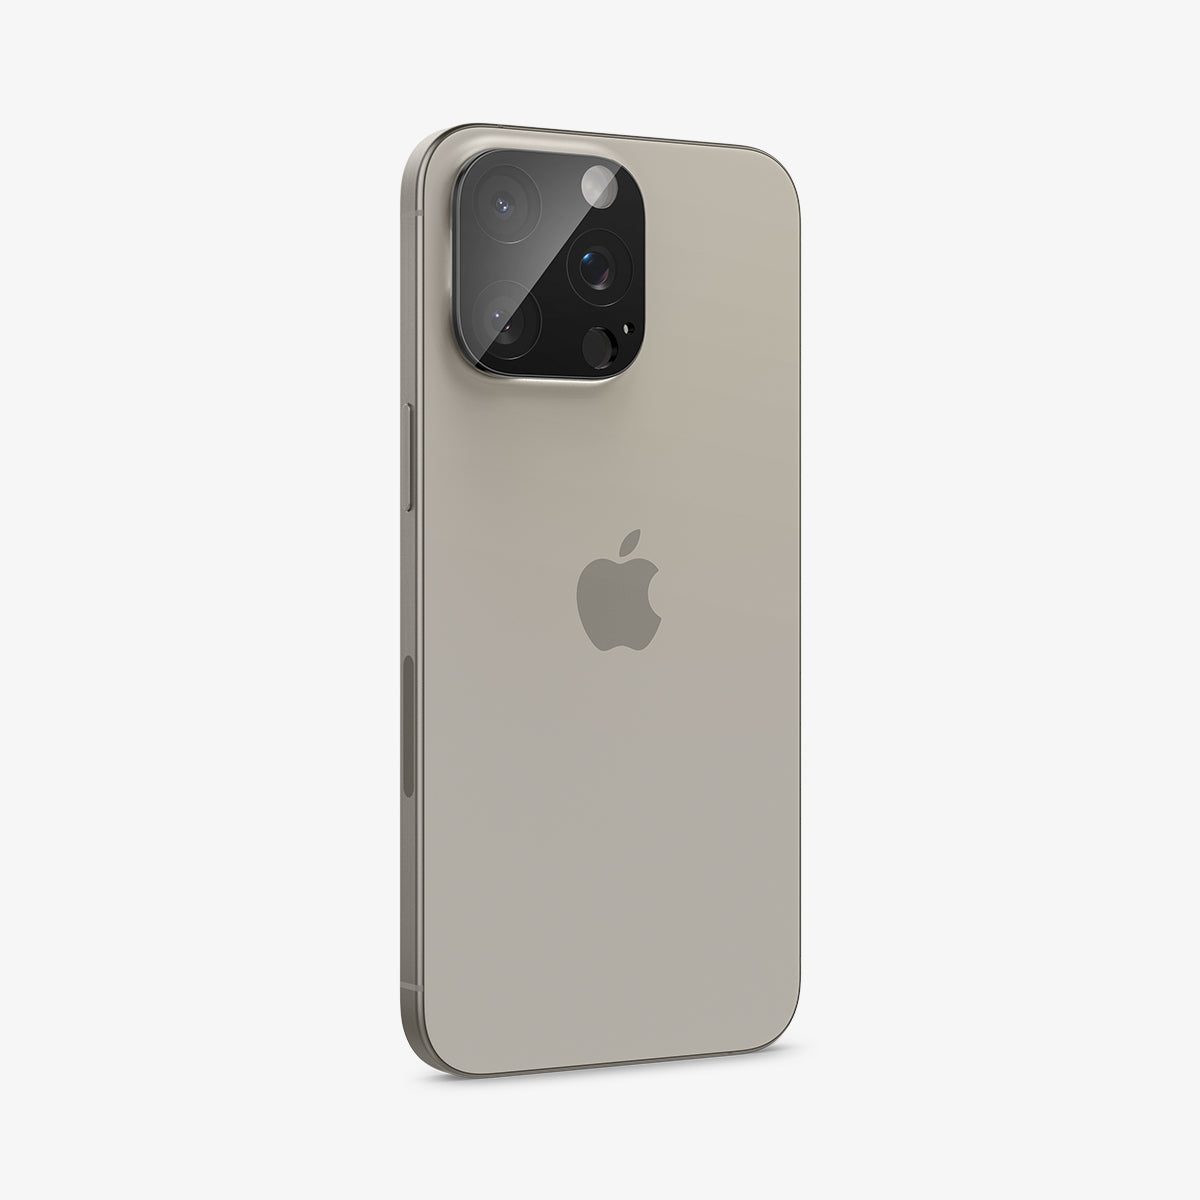 AGL06913 - iPhone 15 Pro / 15 Pro Max Optik Lens Protector in black showing the back and partial side